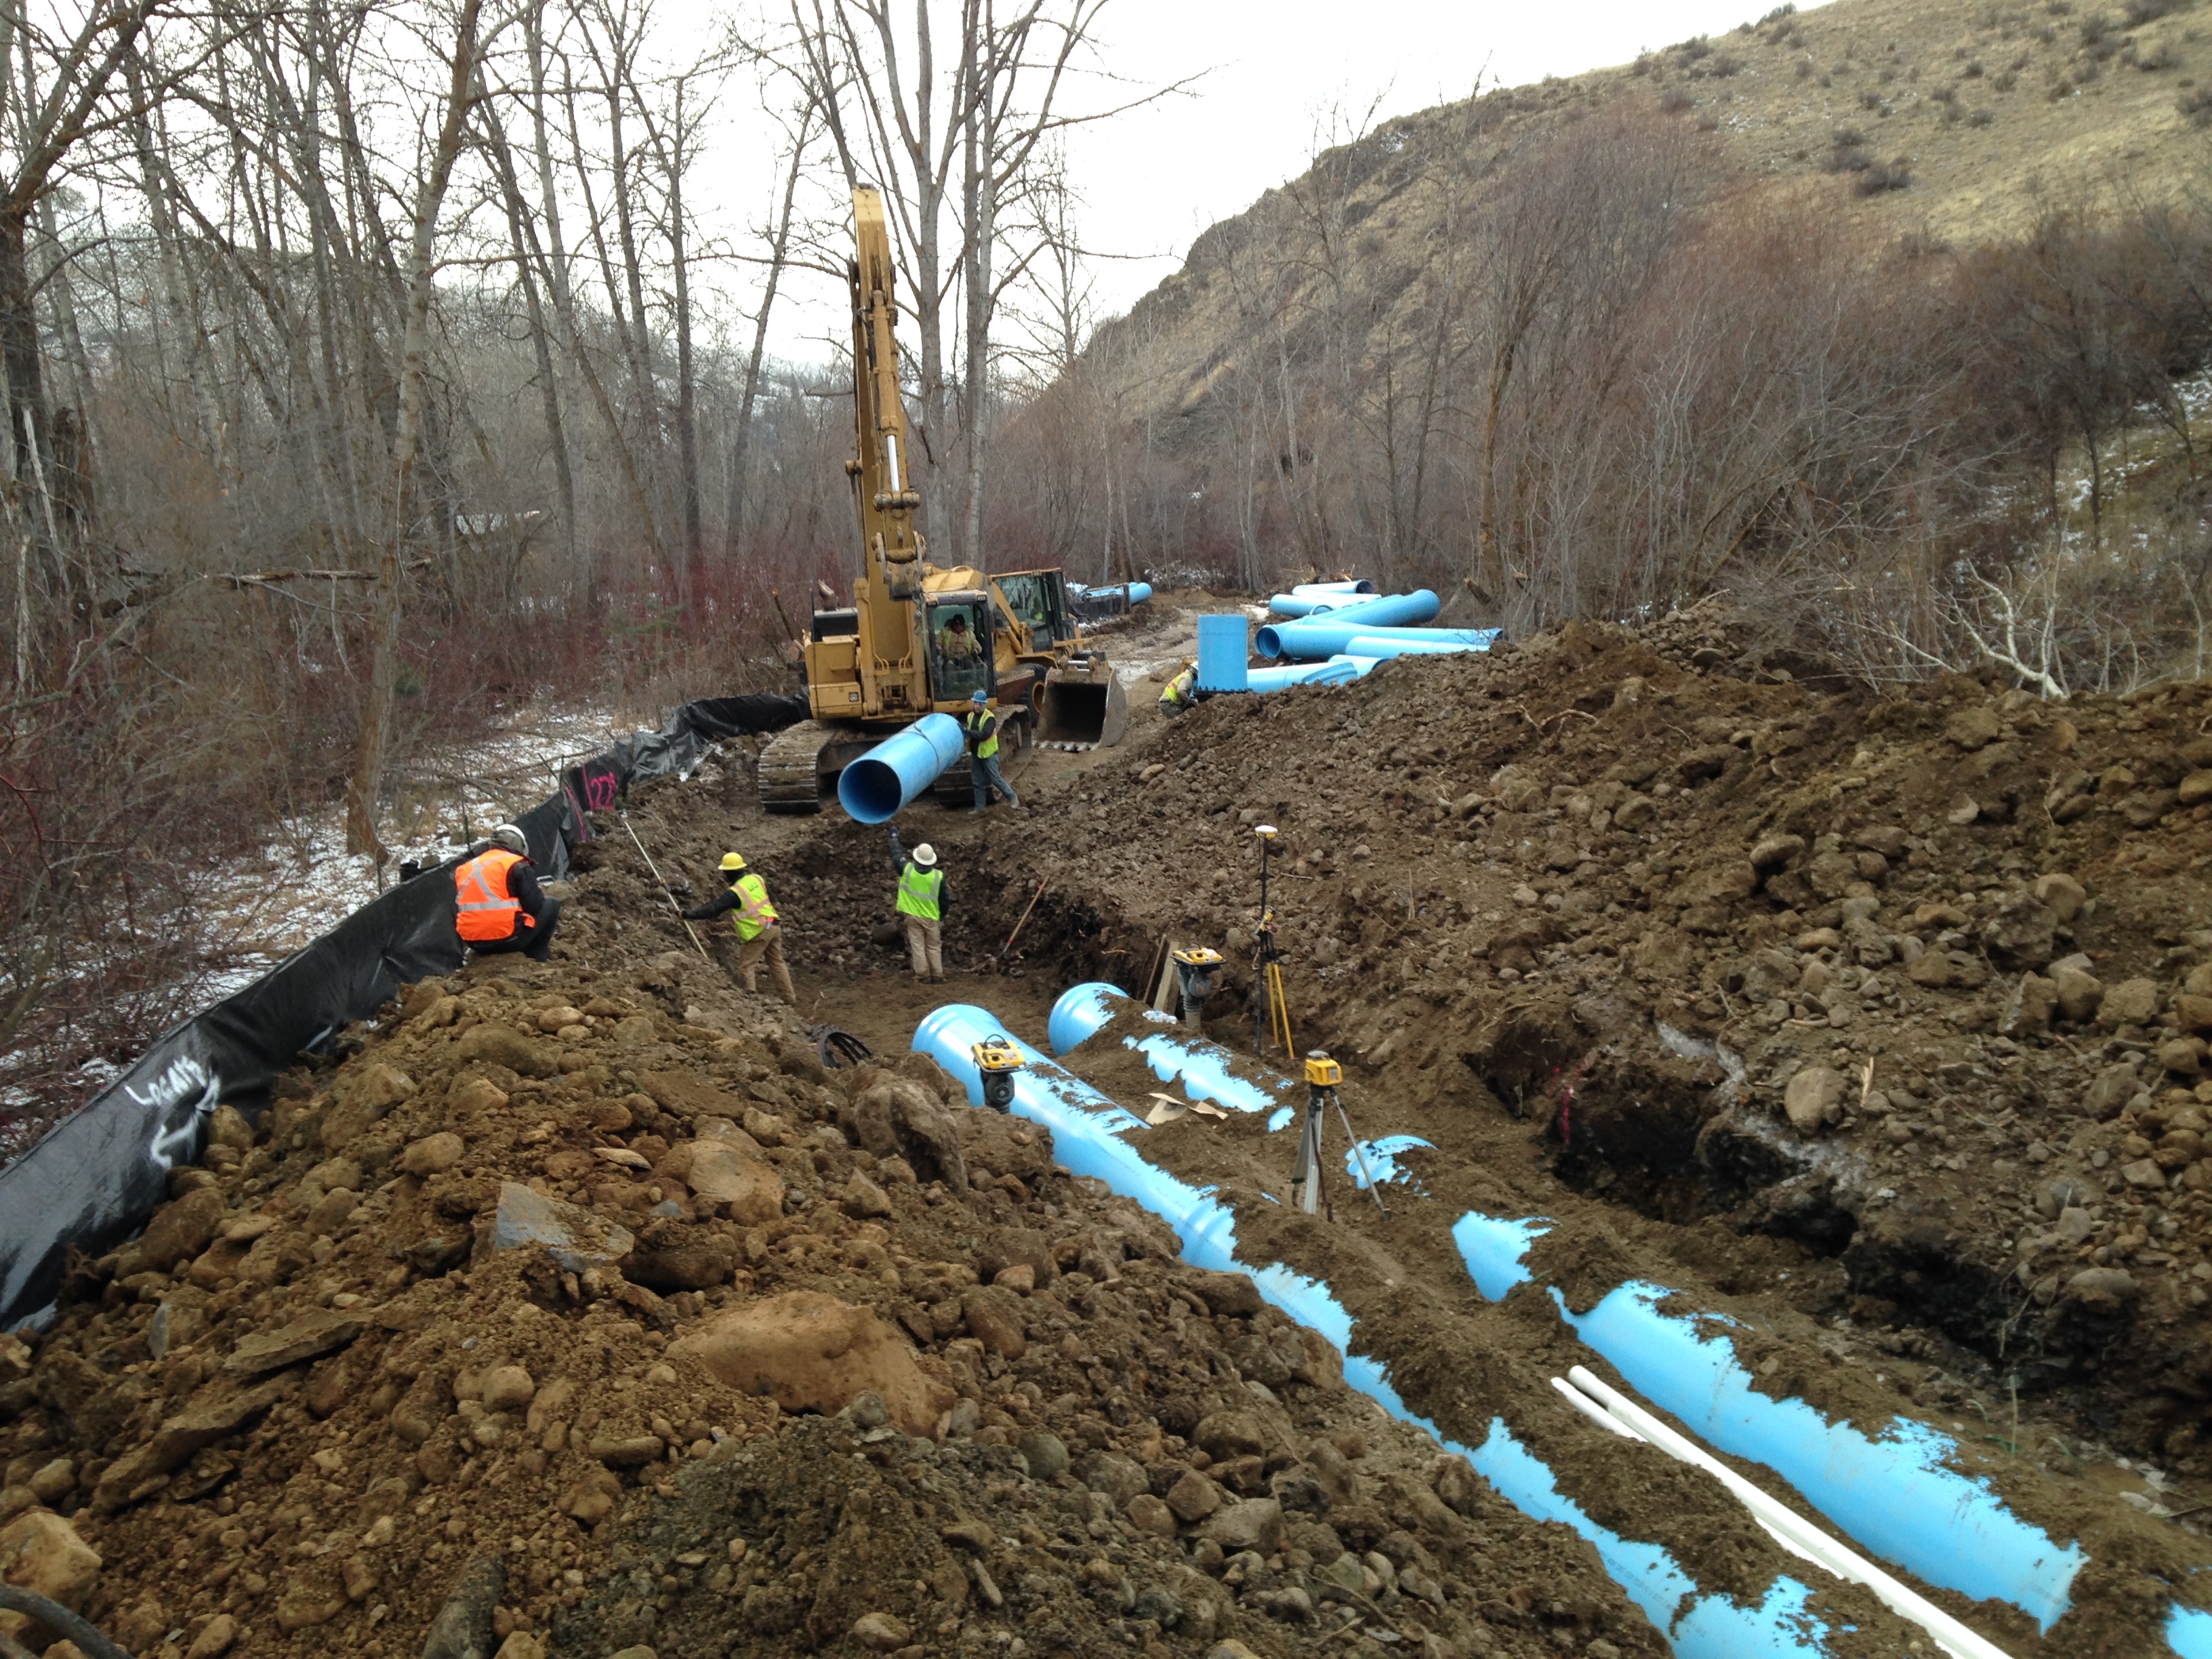 Large blue irrigation pipe is entrenched in the ground next to flowing creek